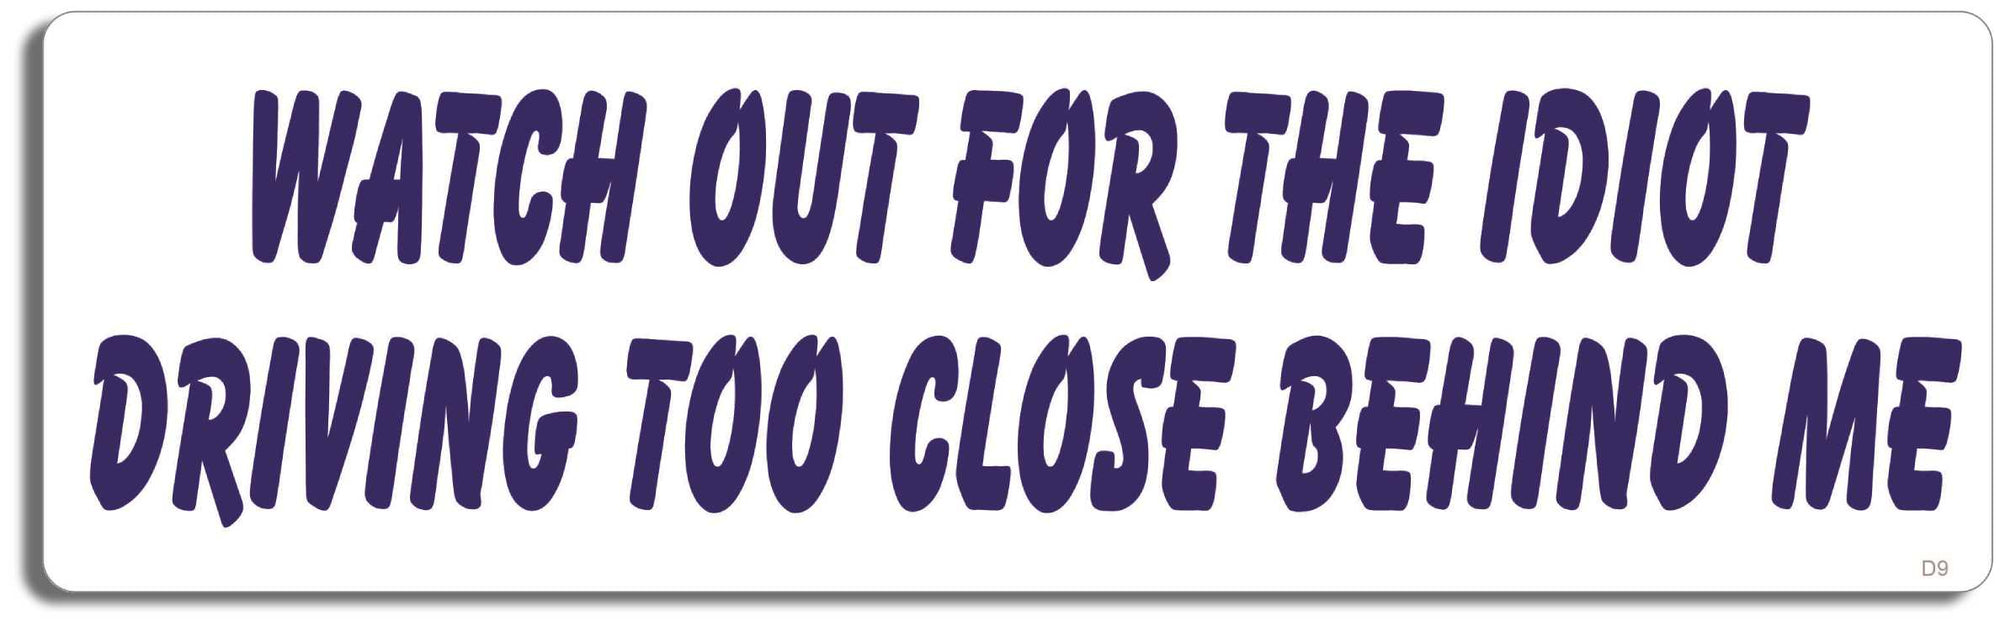 Watch out for the idiot driving too close behind me - 3" x 10" Bumper Sticker--Car Magnet- -  Decal Bumper Sticker-funny Bumper Sticker Car Magnet Watch out for the idiot driving too-  Decal for carsdrive safely, Driving, Funny, safe driving, tailgaters, tailgating